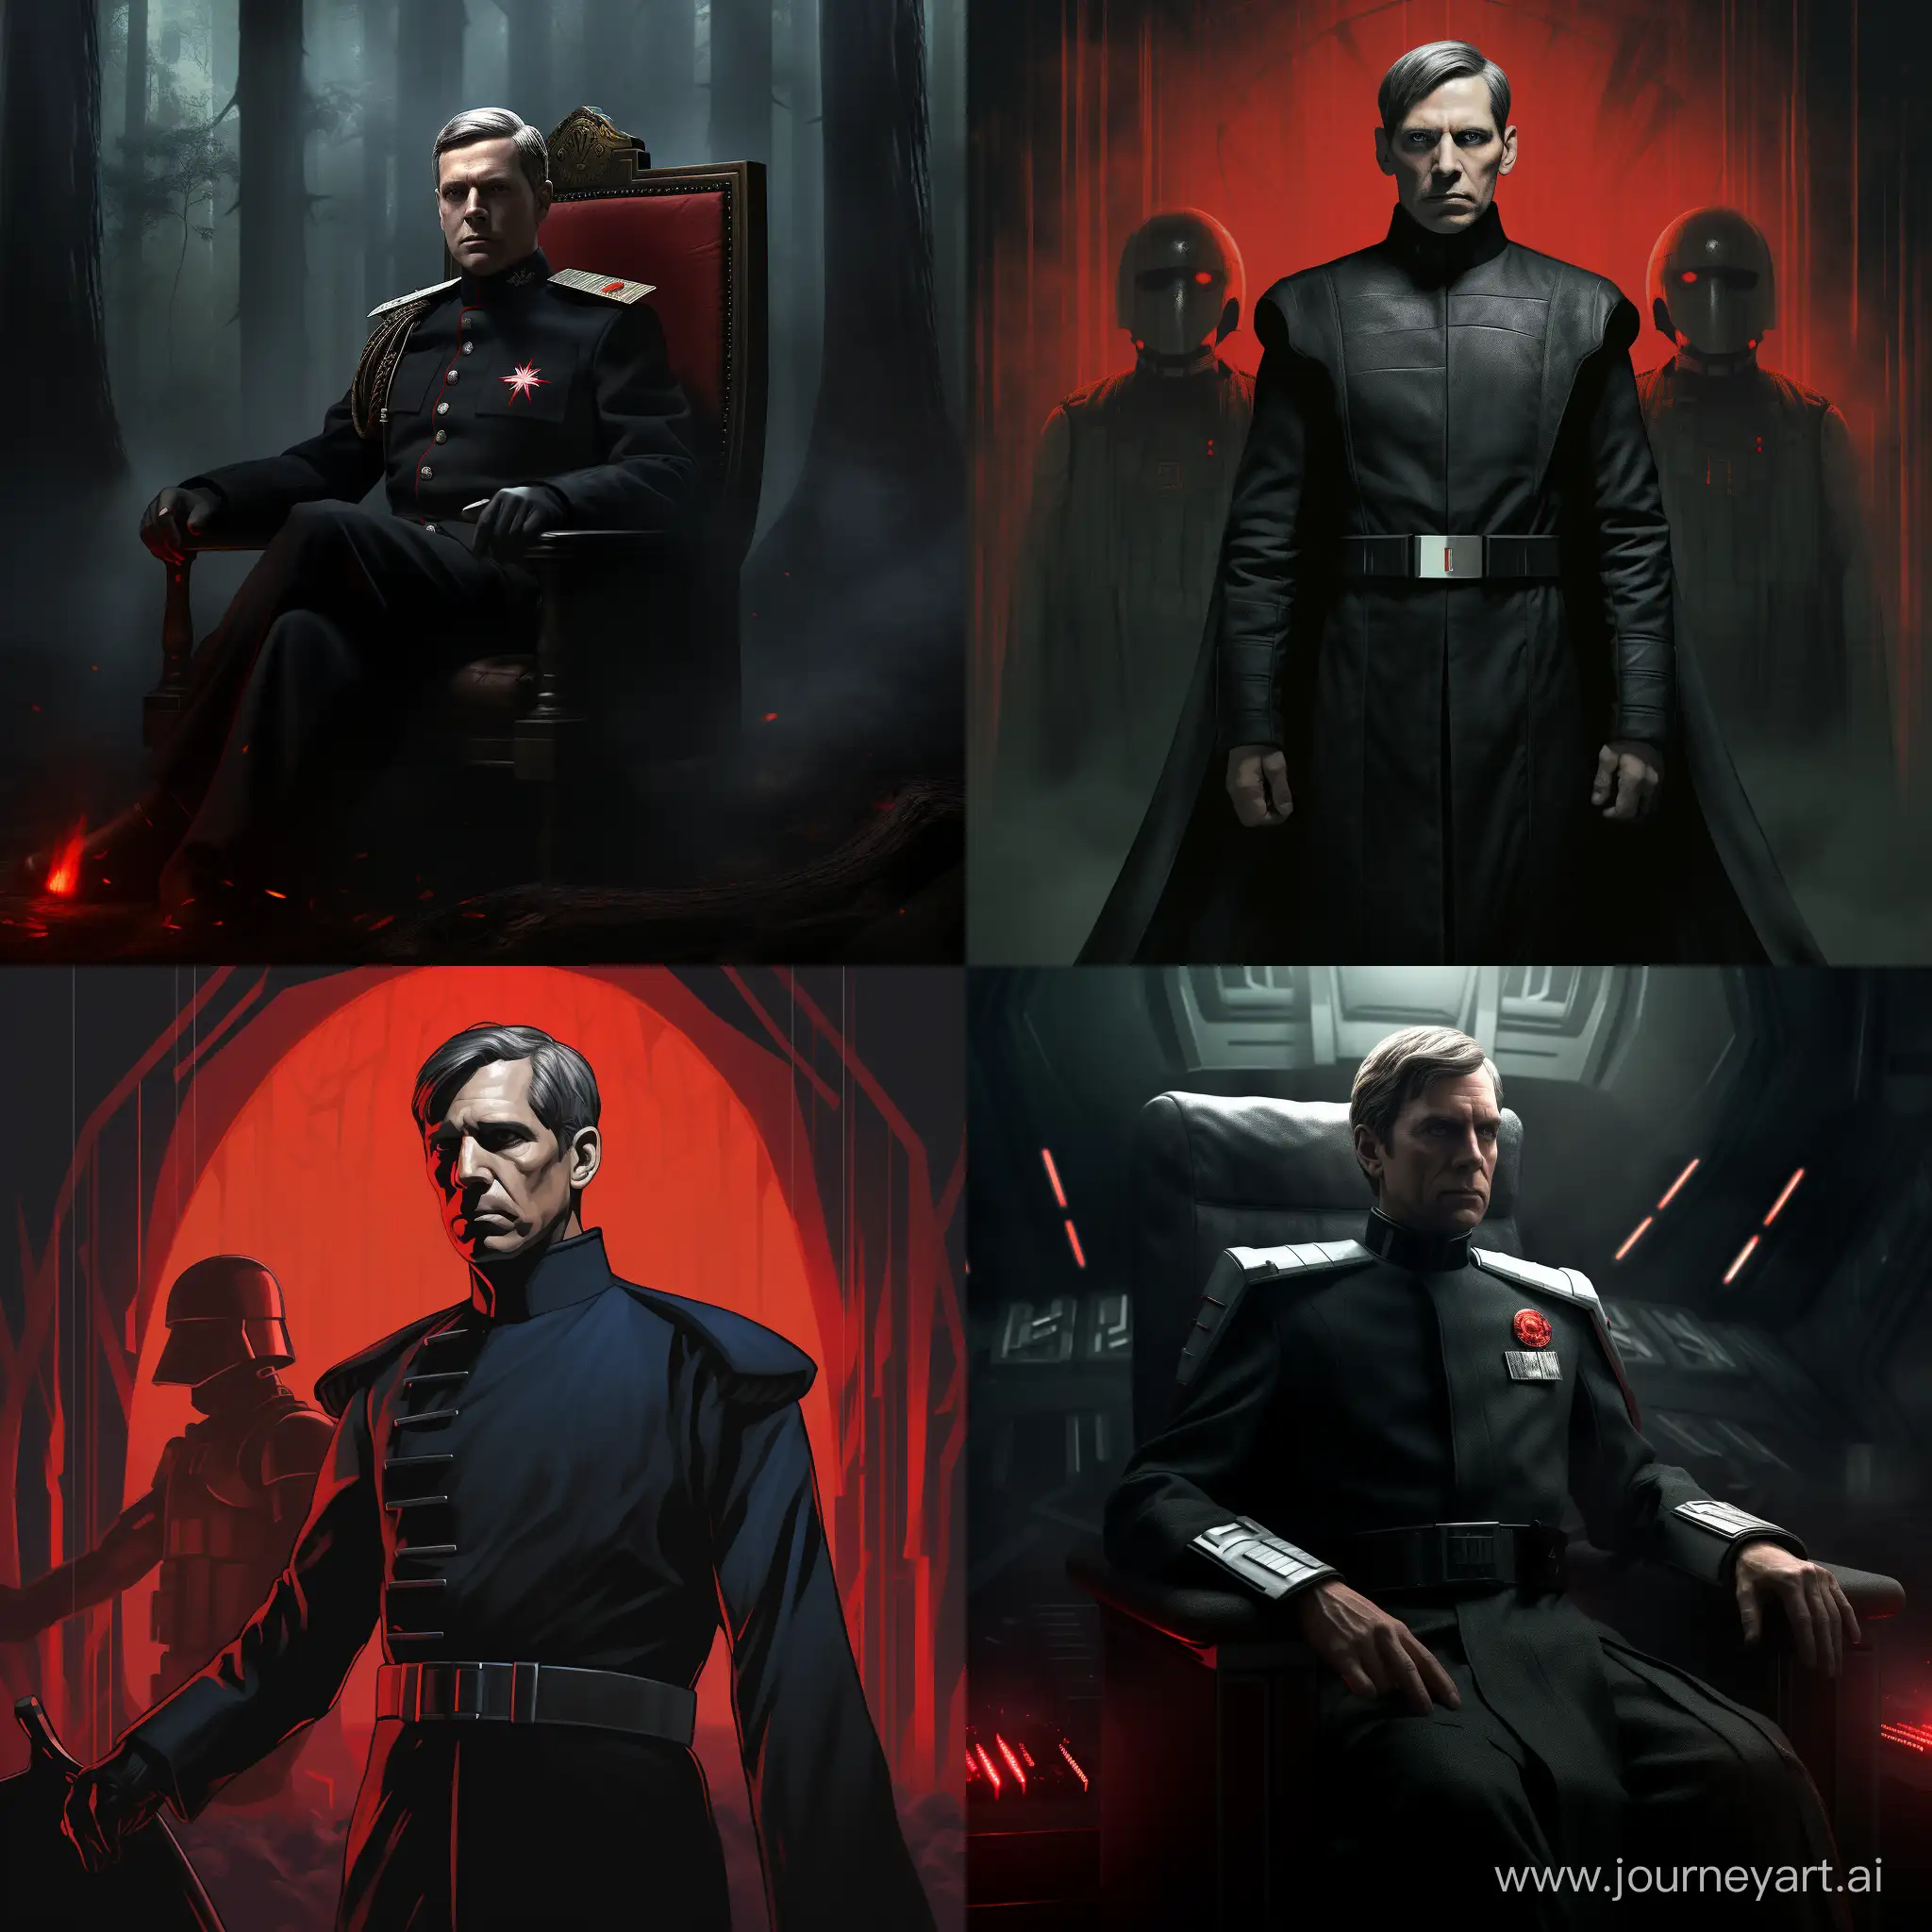 Imposing-Director-Krennic-Portrait-with-AR-Enhancement-Limited-Edition-57724